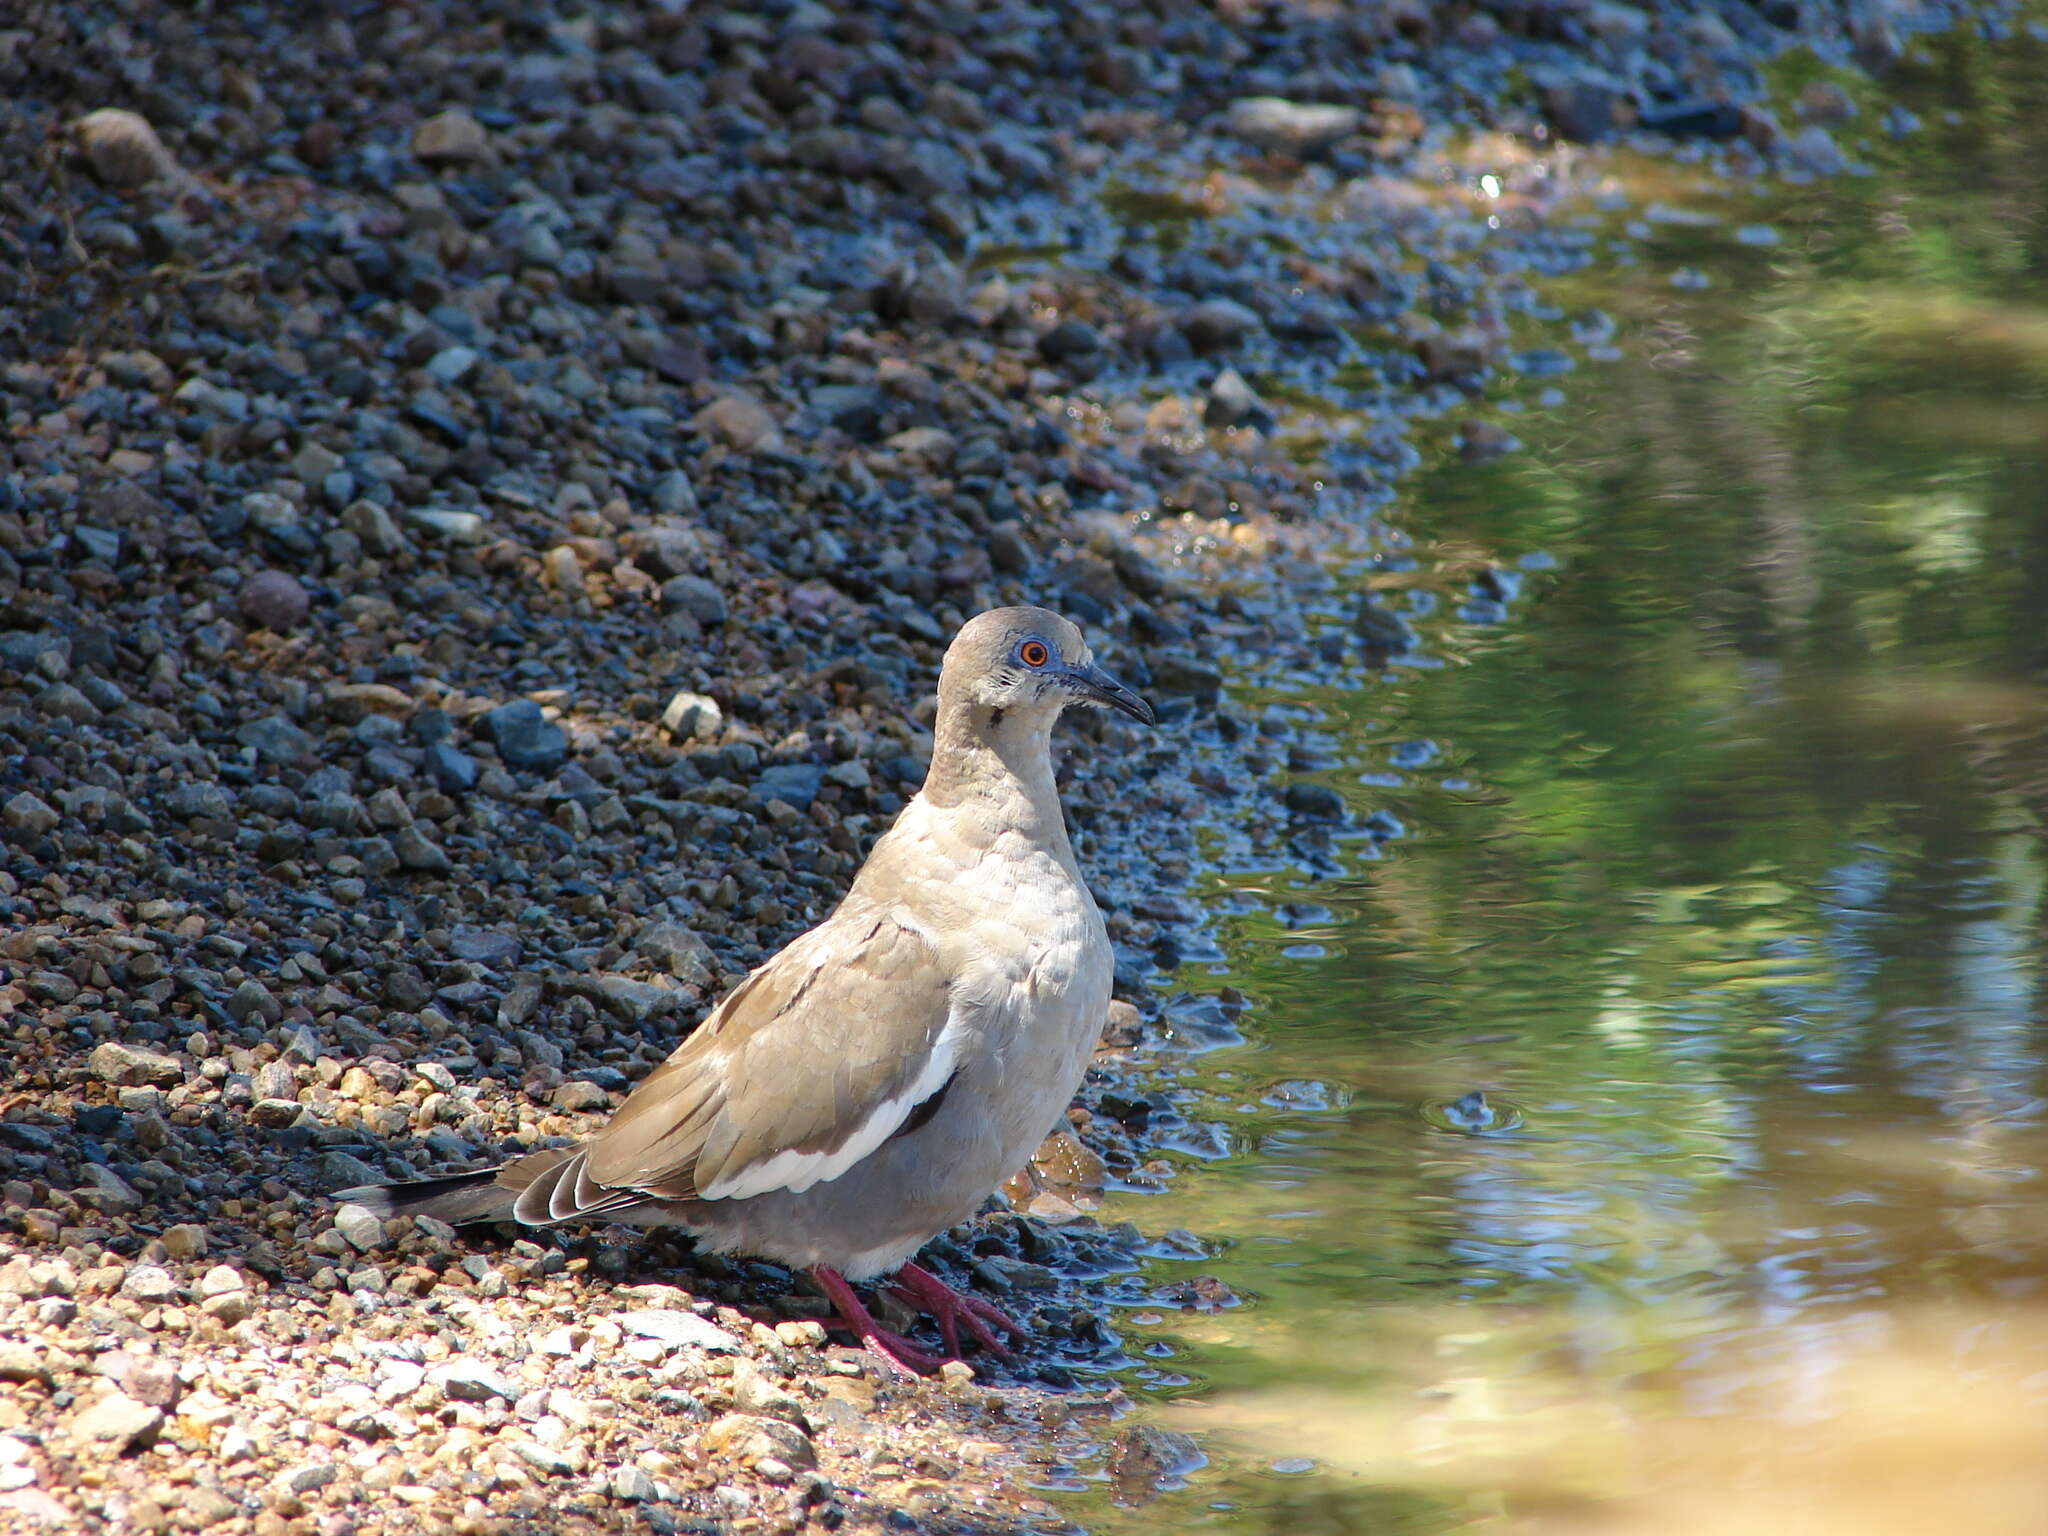 Image of White-winged Dove